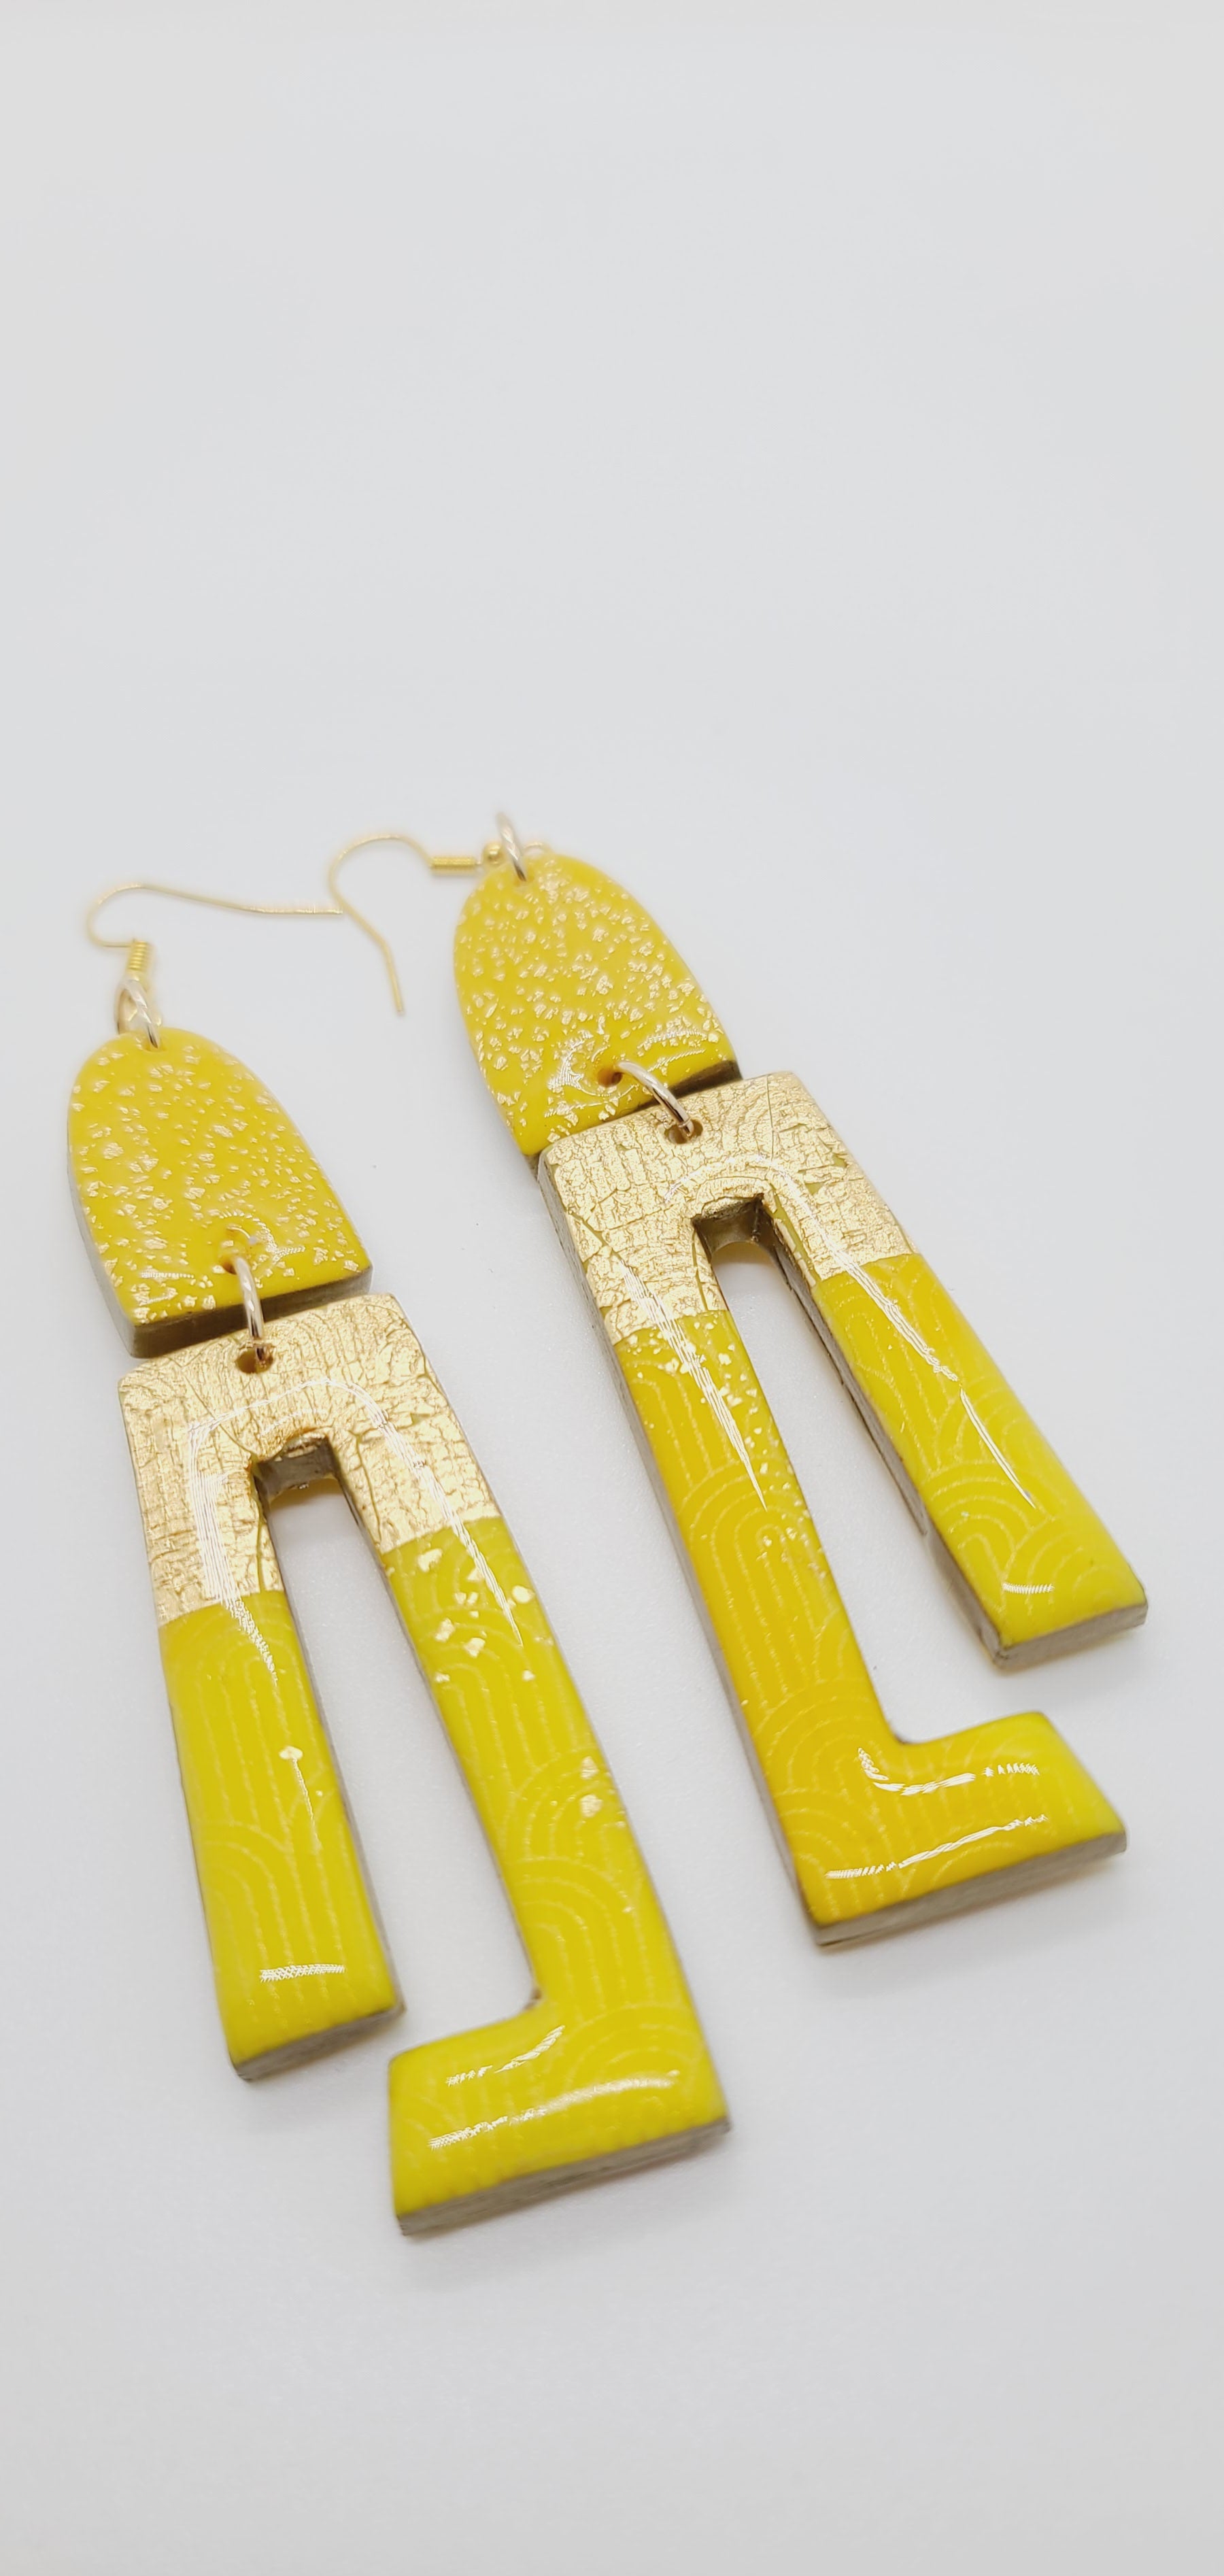 Length: 4.5 inches | Weight: 0.8 ounces  Distinctly You! These earrings are made with gold and canary yellow polymer clay covered in resin.